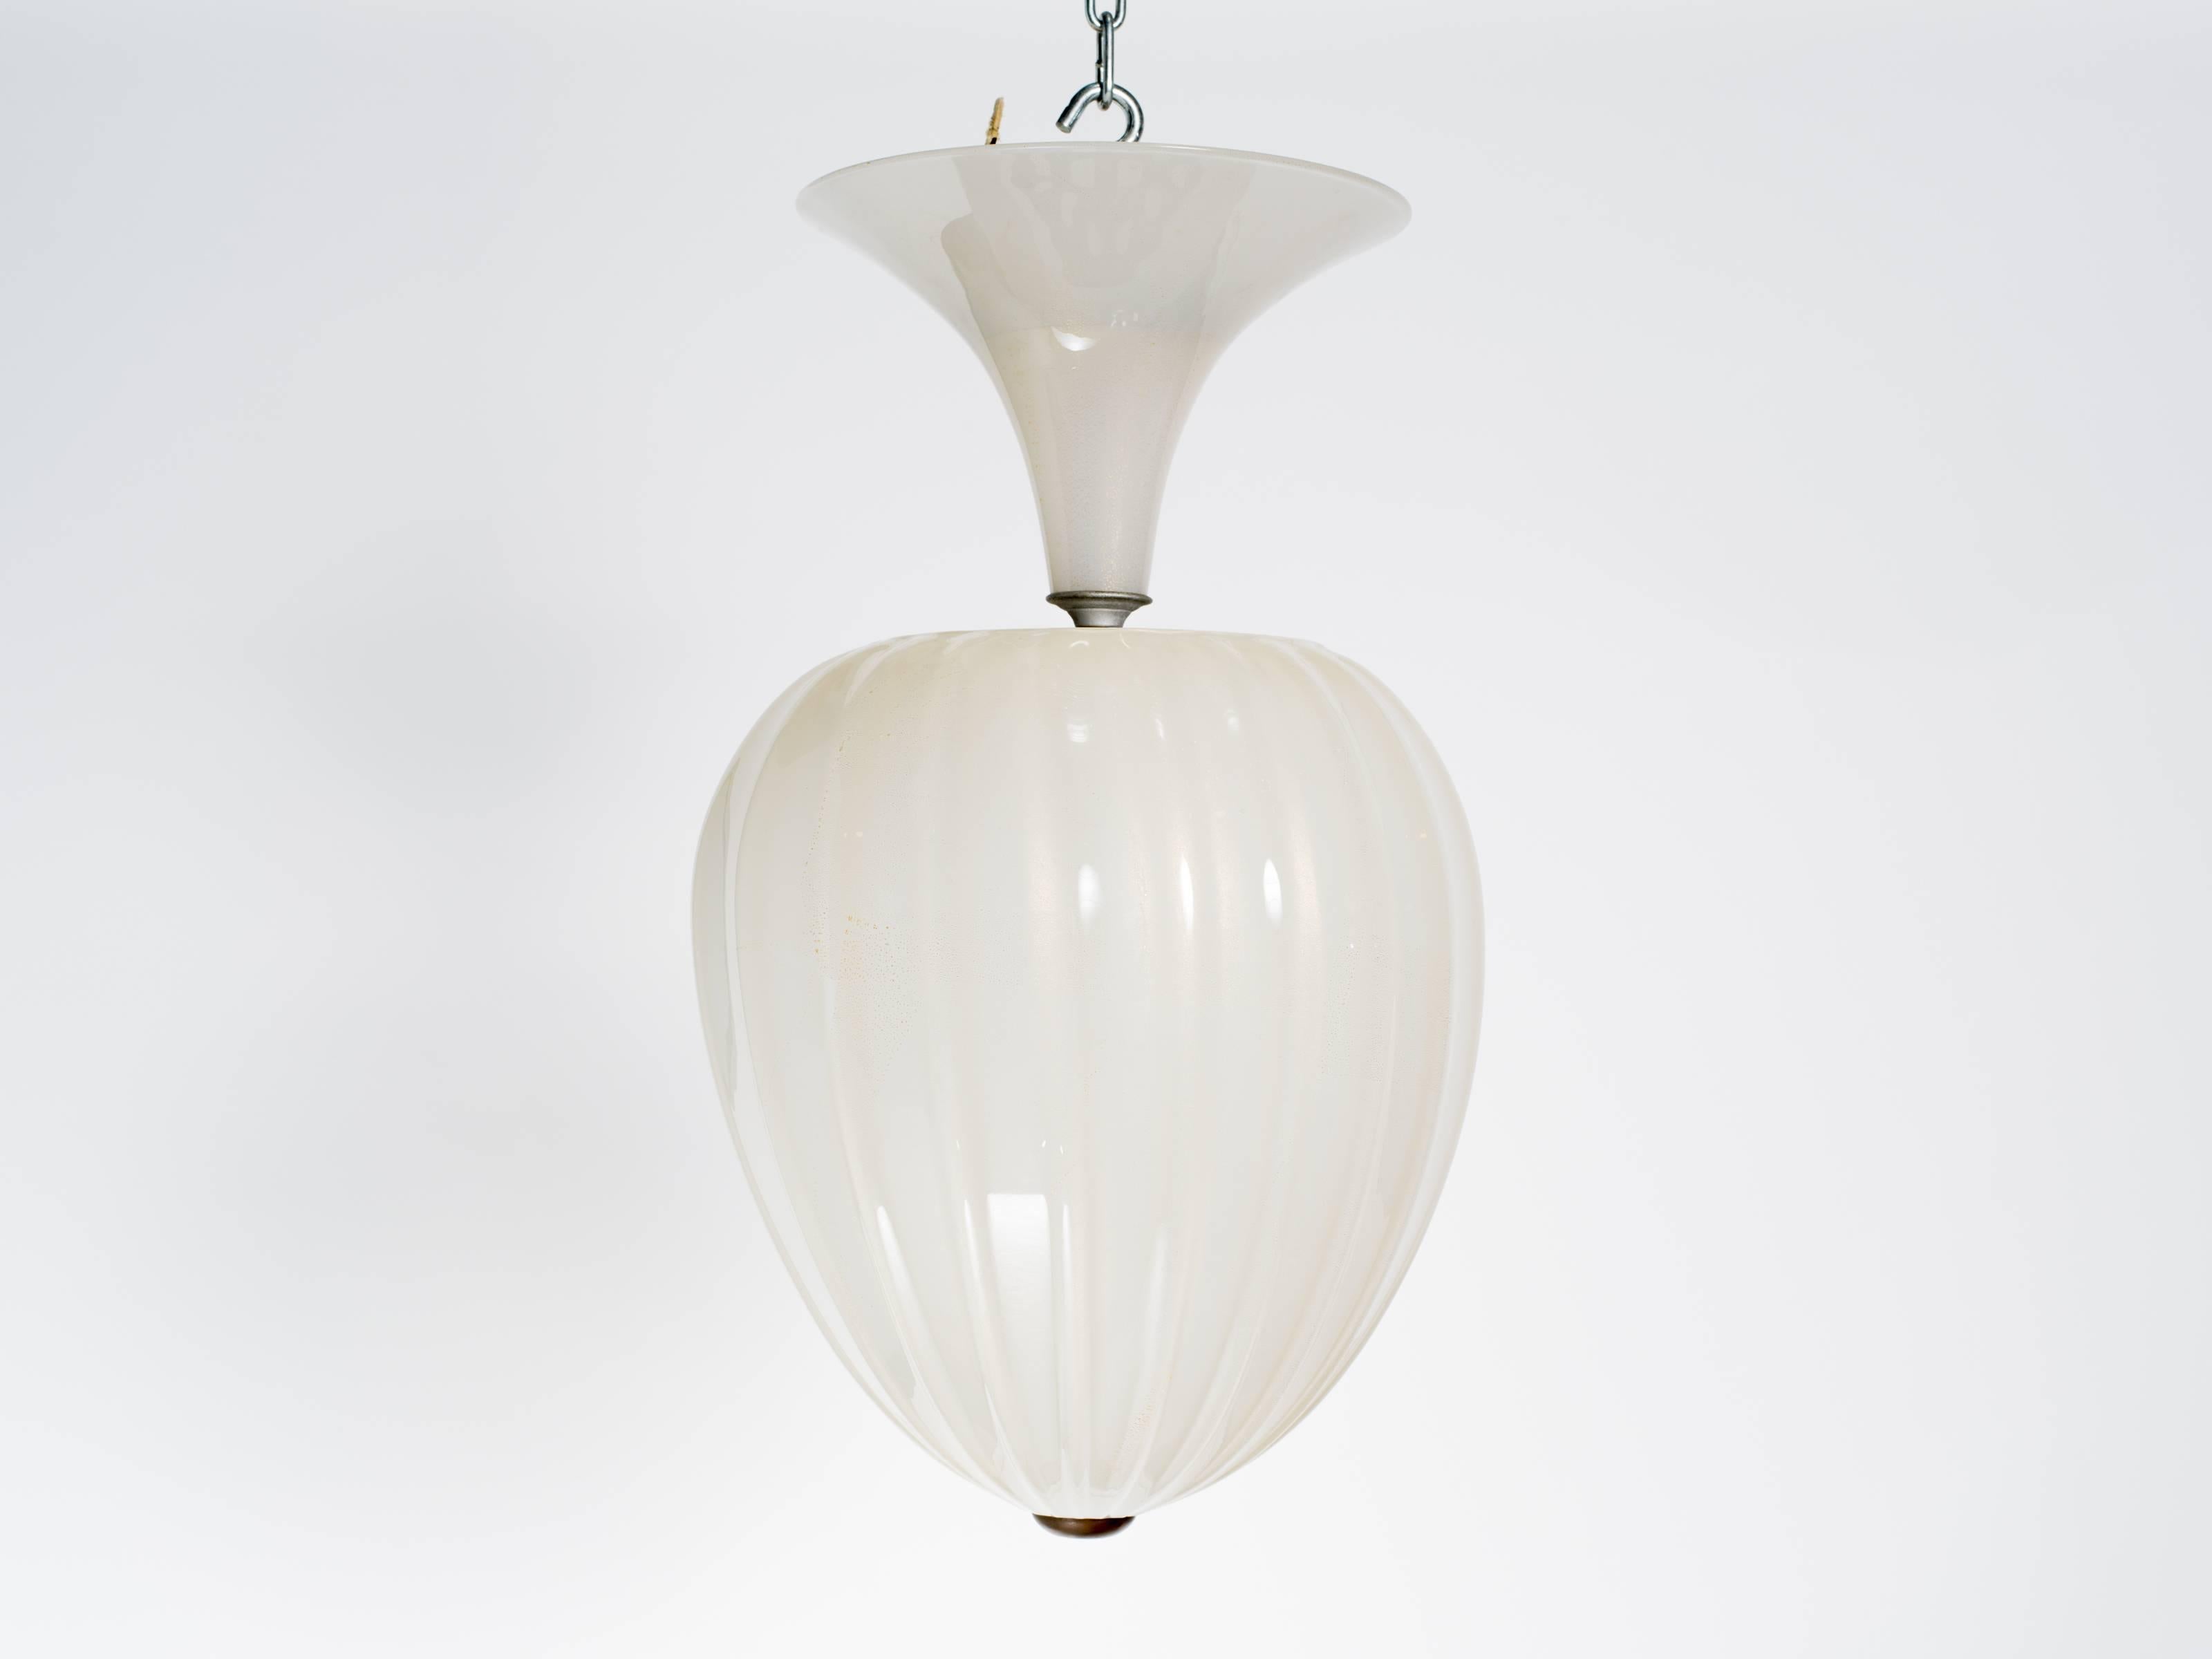 Stunning 1940s Seguso white with gold flecks  Murano glass teardrop  light fixture.White with gold flakes. Proffesionaly rewired. Has 3 sockets, each socket can hold a 100 watt bulb.  The pictures don't do it justice.